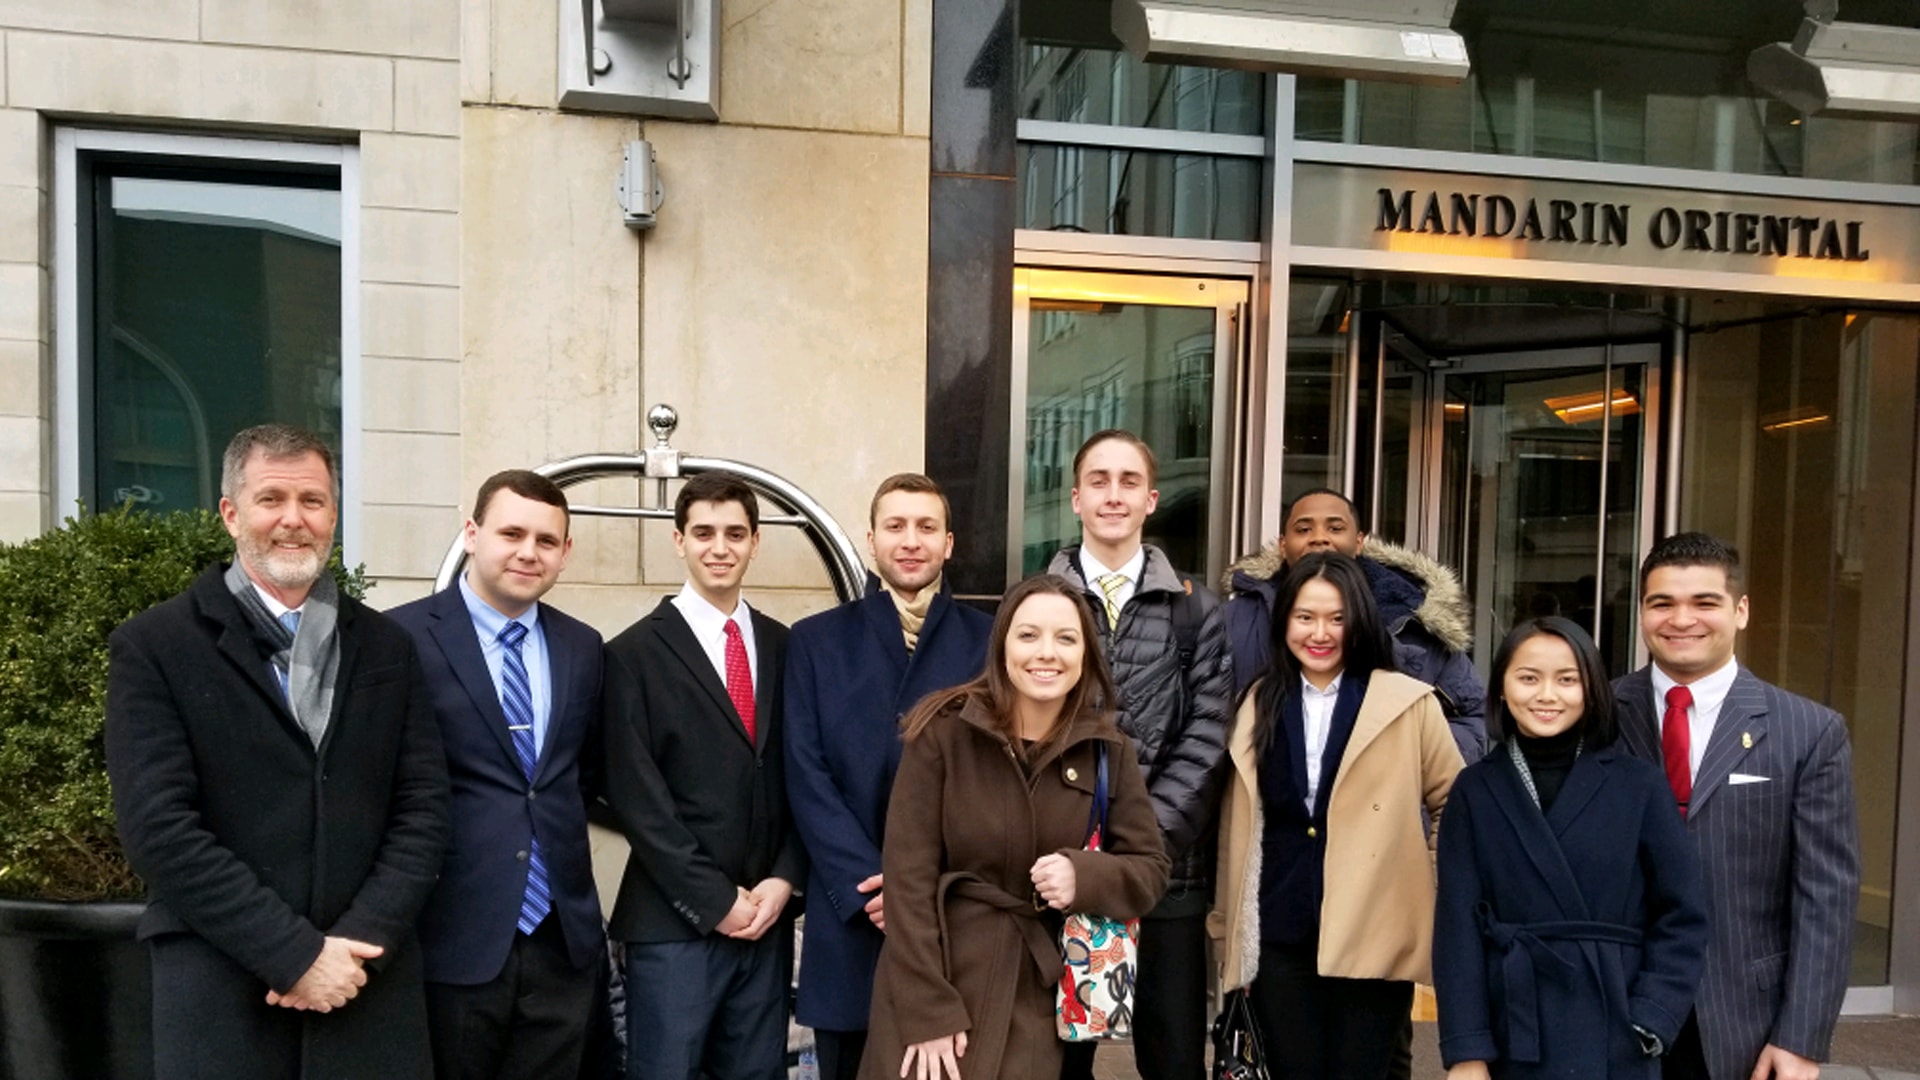 Smiling JWU students lined up in front of the Mandarin Oriental hotel for a group shot